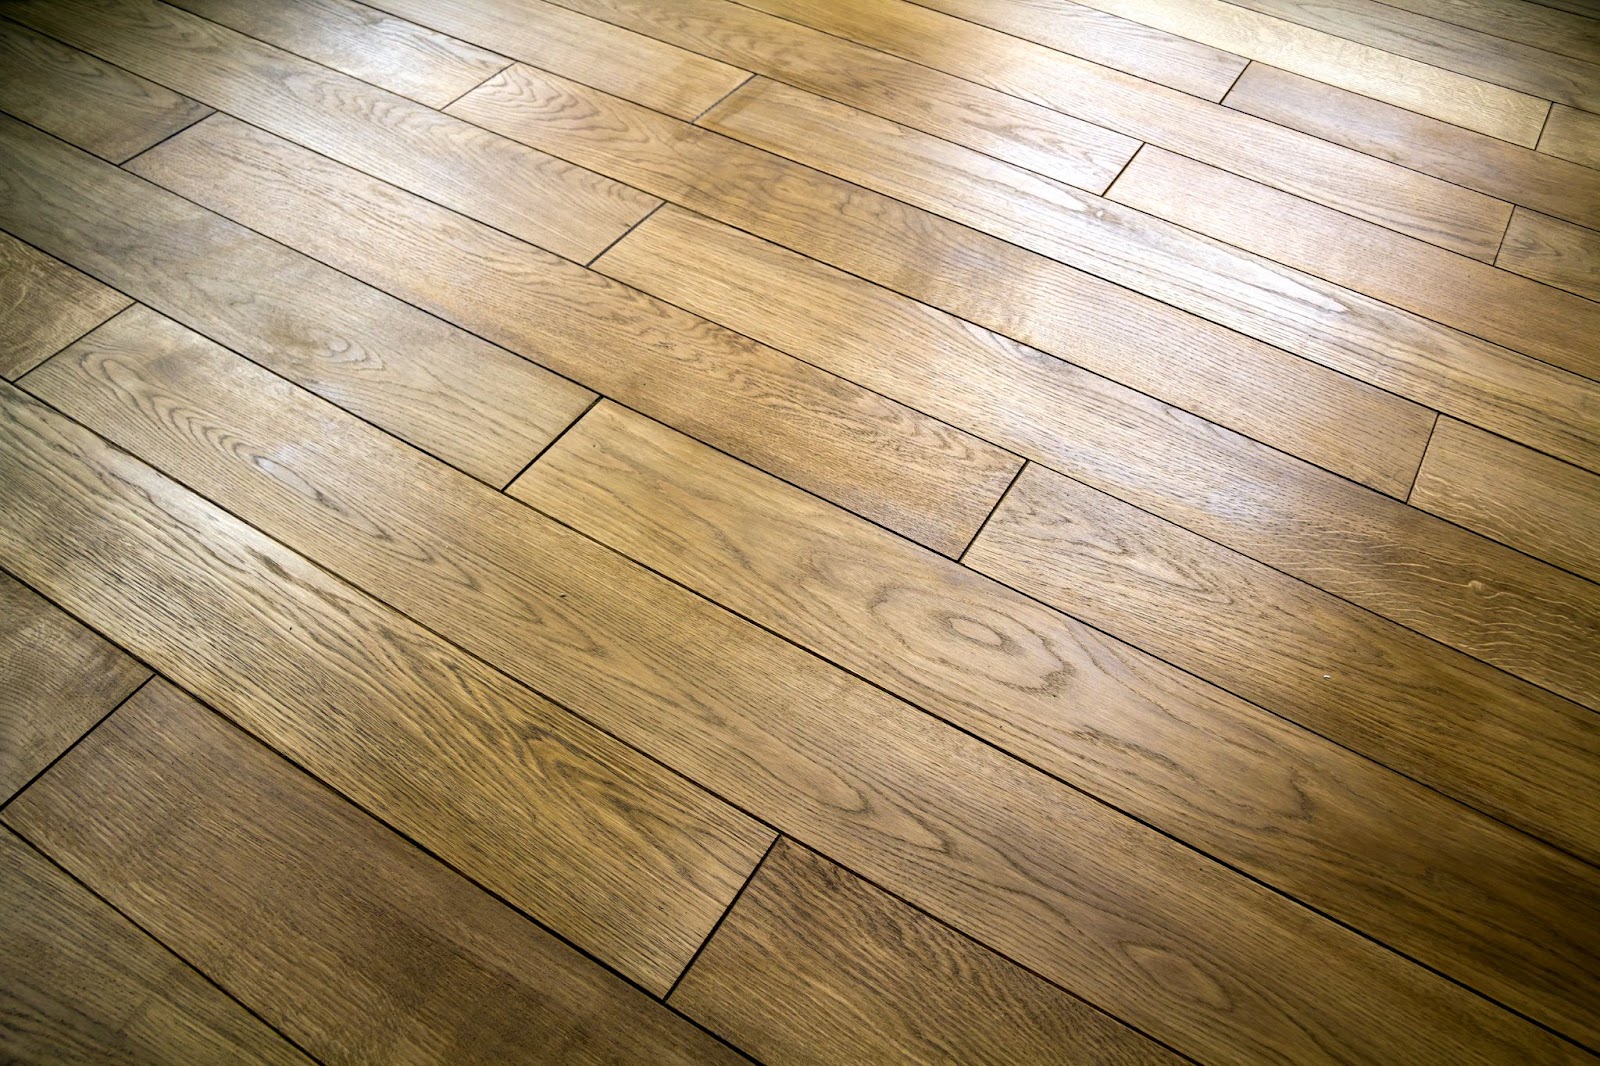 The natural brown texture of the wooden parquet floorboards adds warmth and character to any living space.